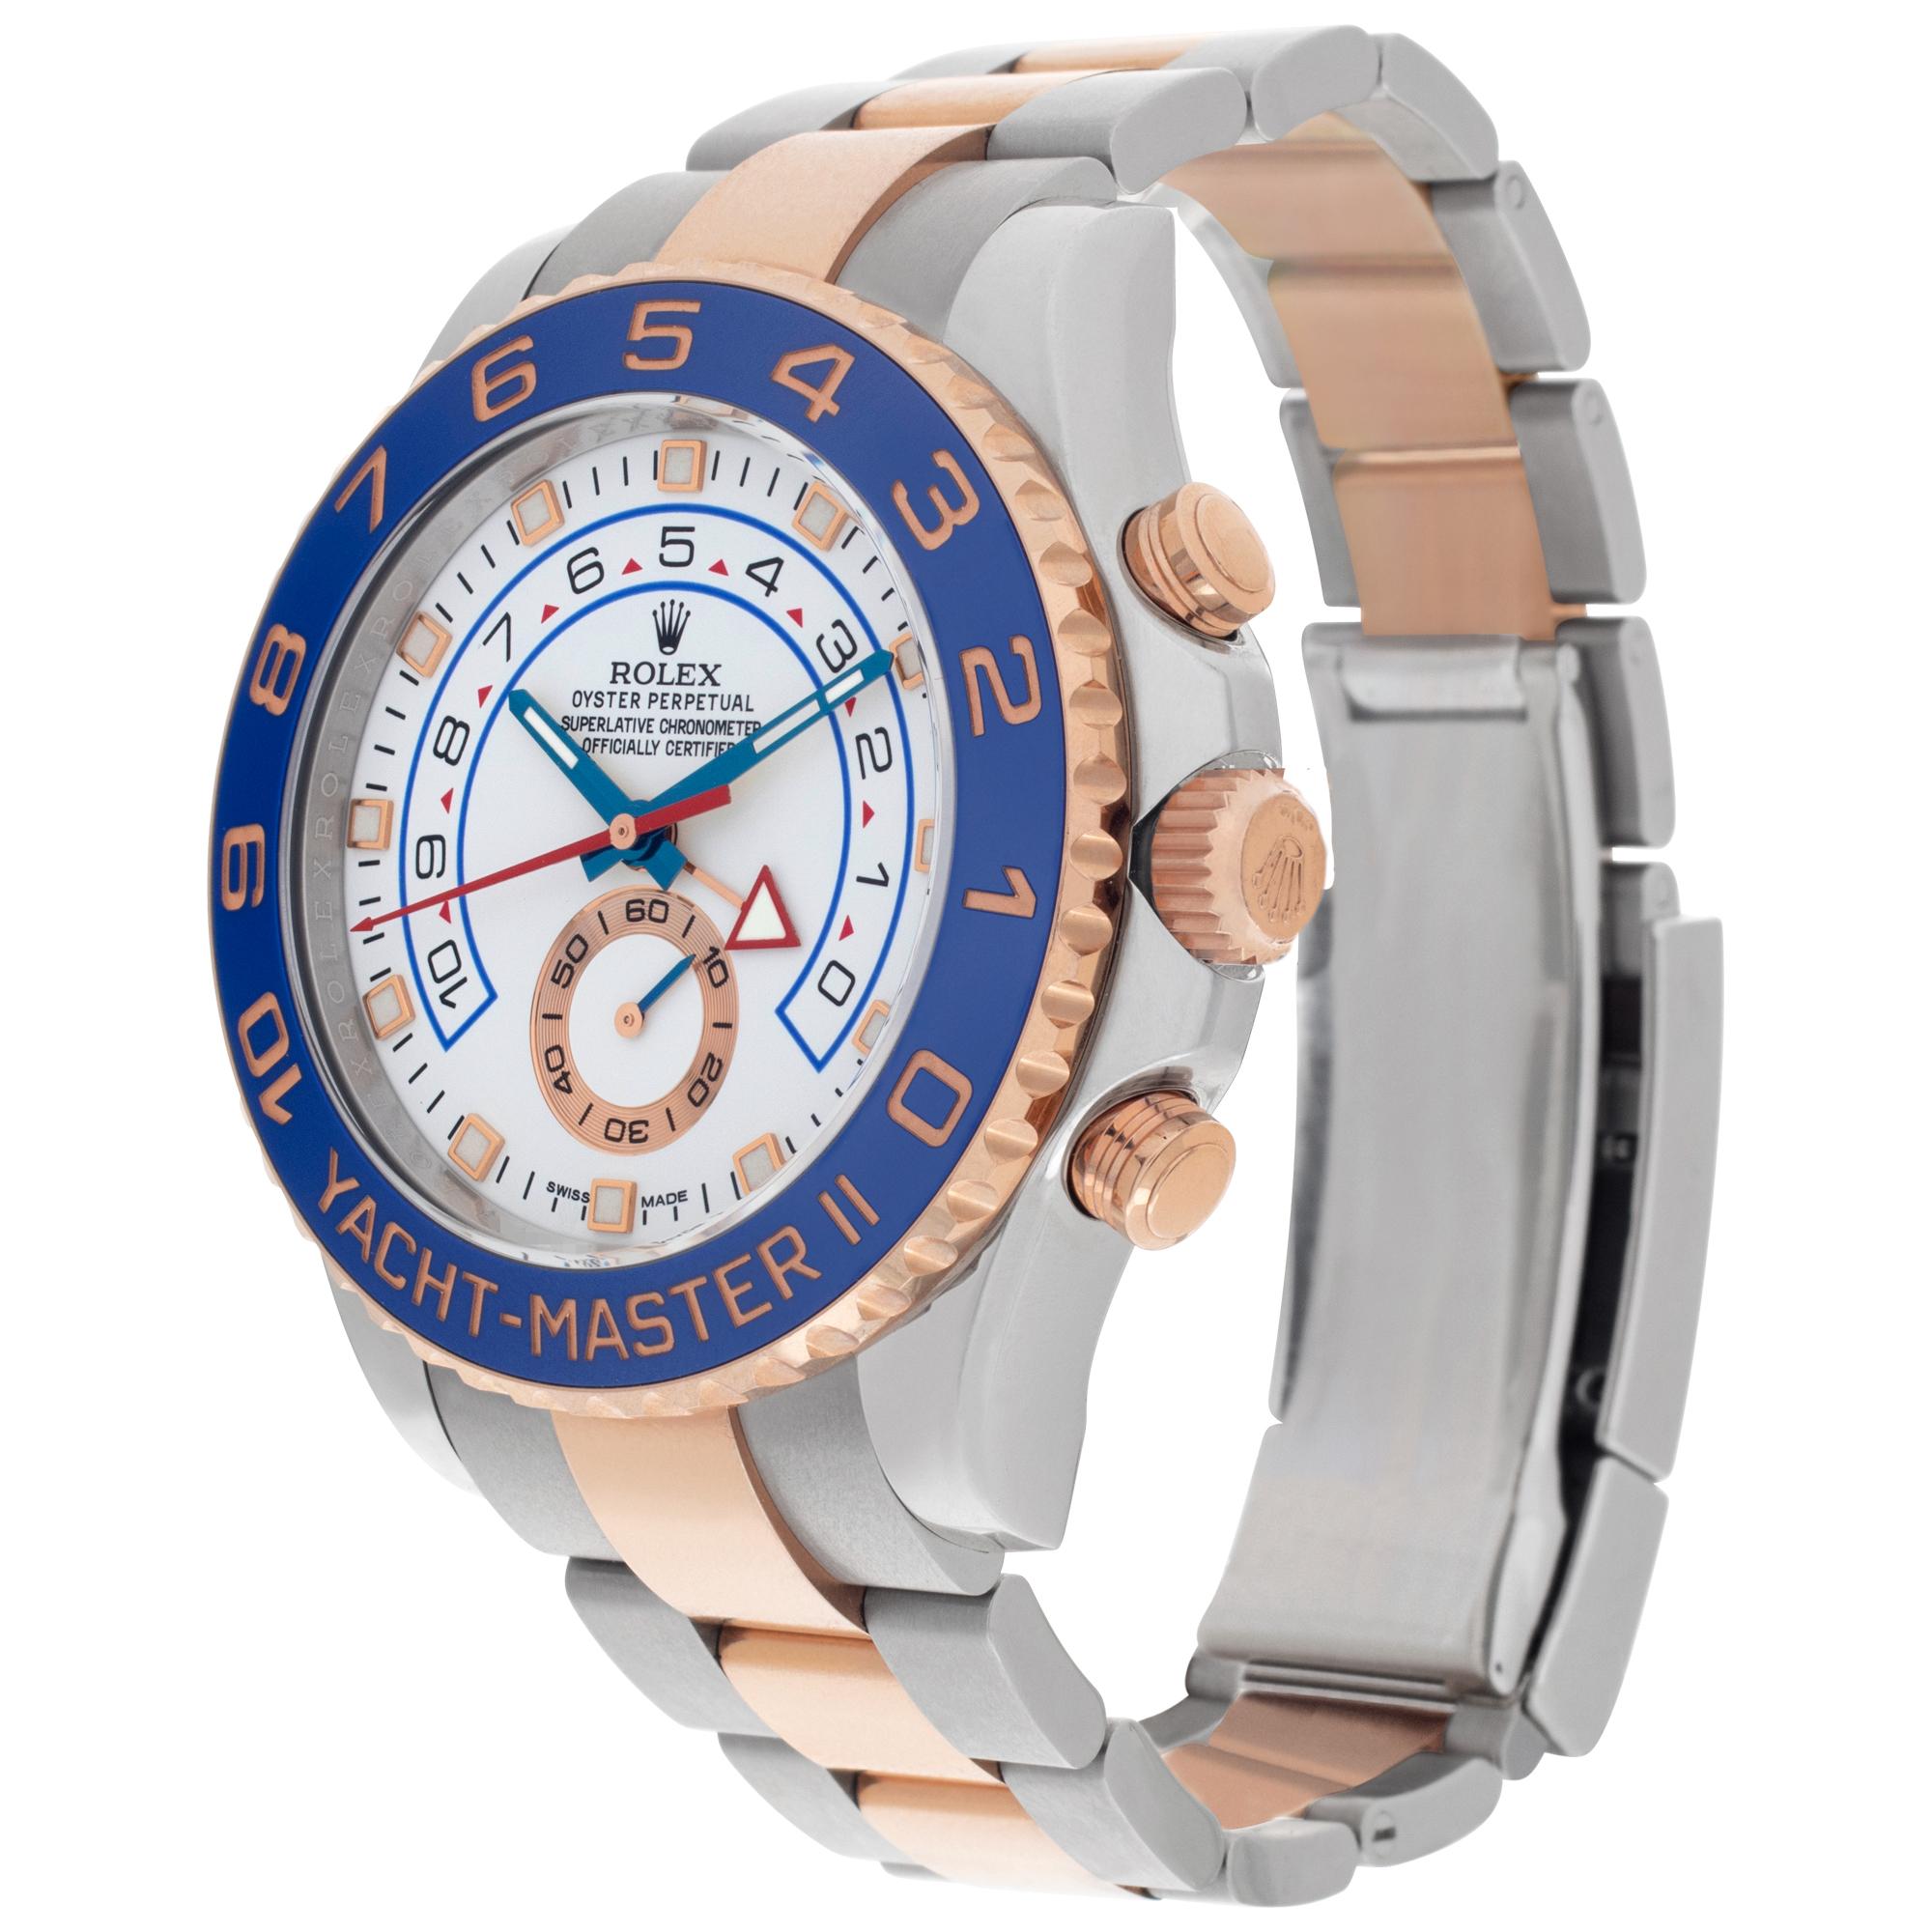 Rolex Yacht-Master II in stainless steel & 18k rose gold. Auto with Regatta countdown & sub-seconds. 44 mm case size. With box and papers. Ref 116681. **Bank wire only at this price** Fine Pre-owned Rolex Watch.

Certified preowned Sport Rolex